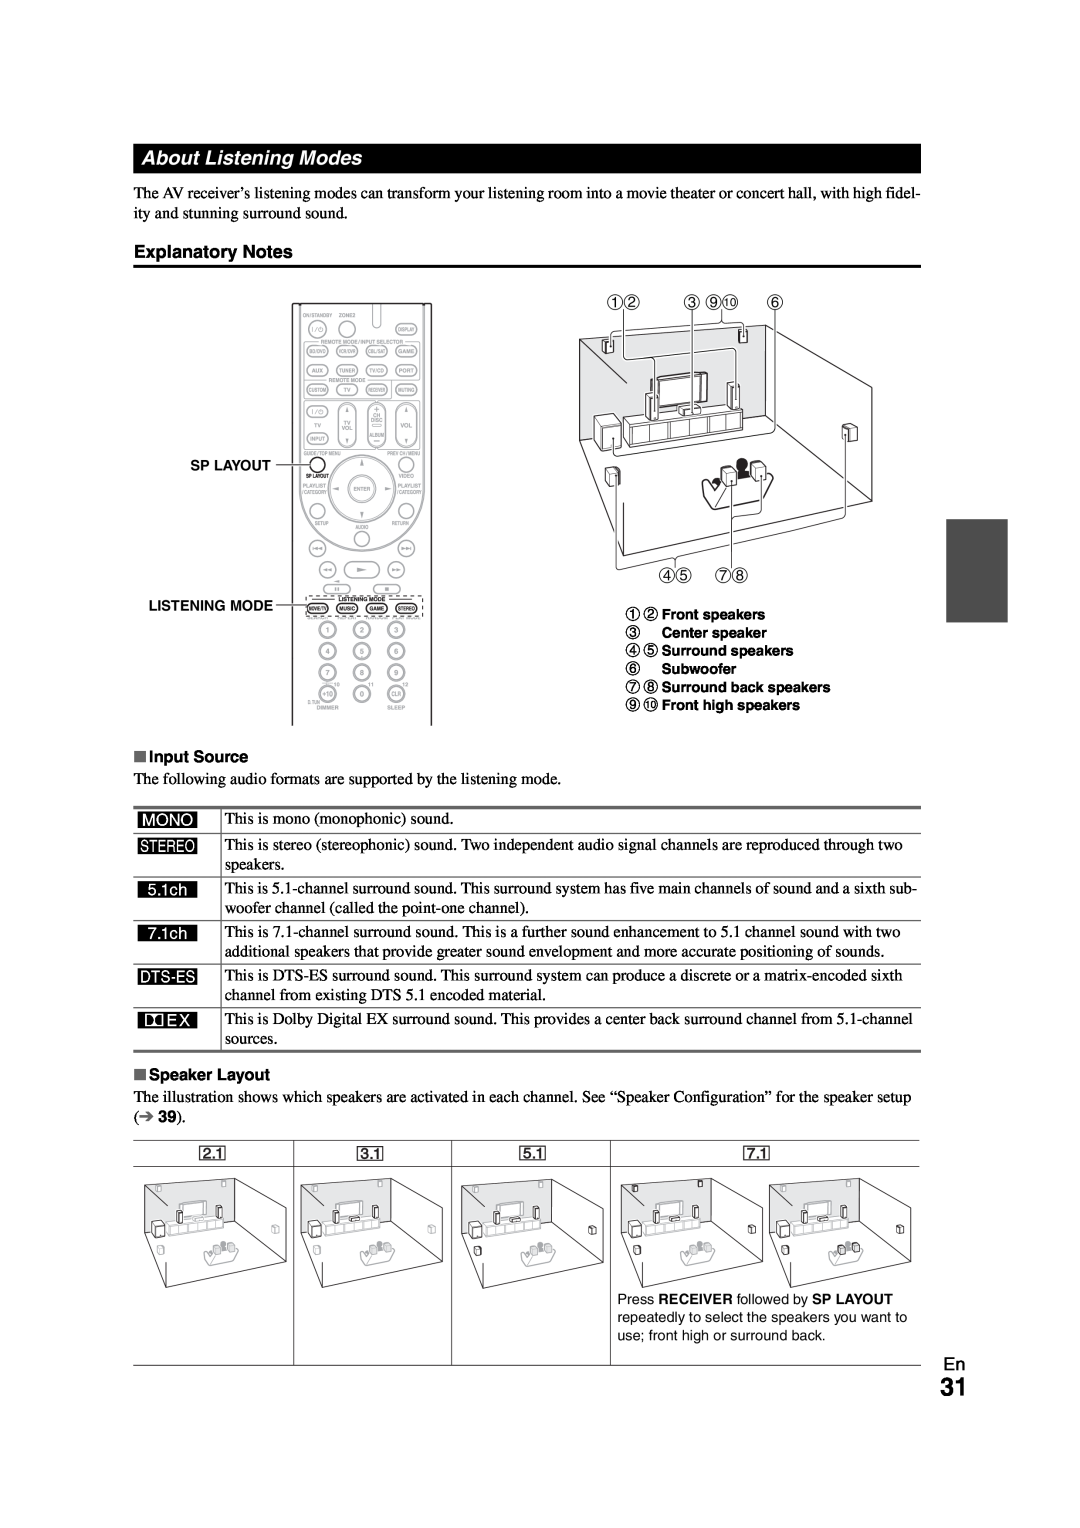 Onkyo HT-R980 instruction manual About Listening Modes, Explanatory Notes, de gh, Input Source, Speaker Layout 